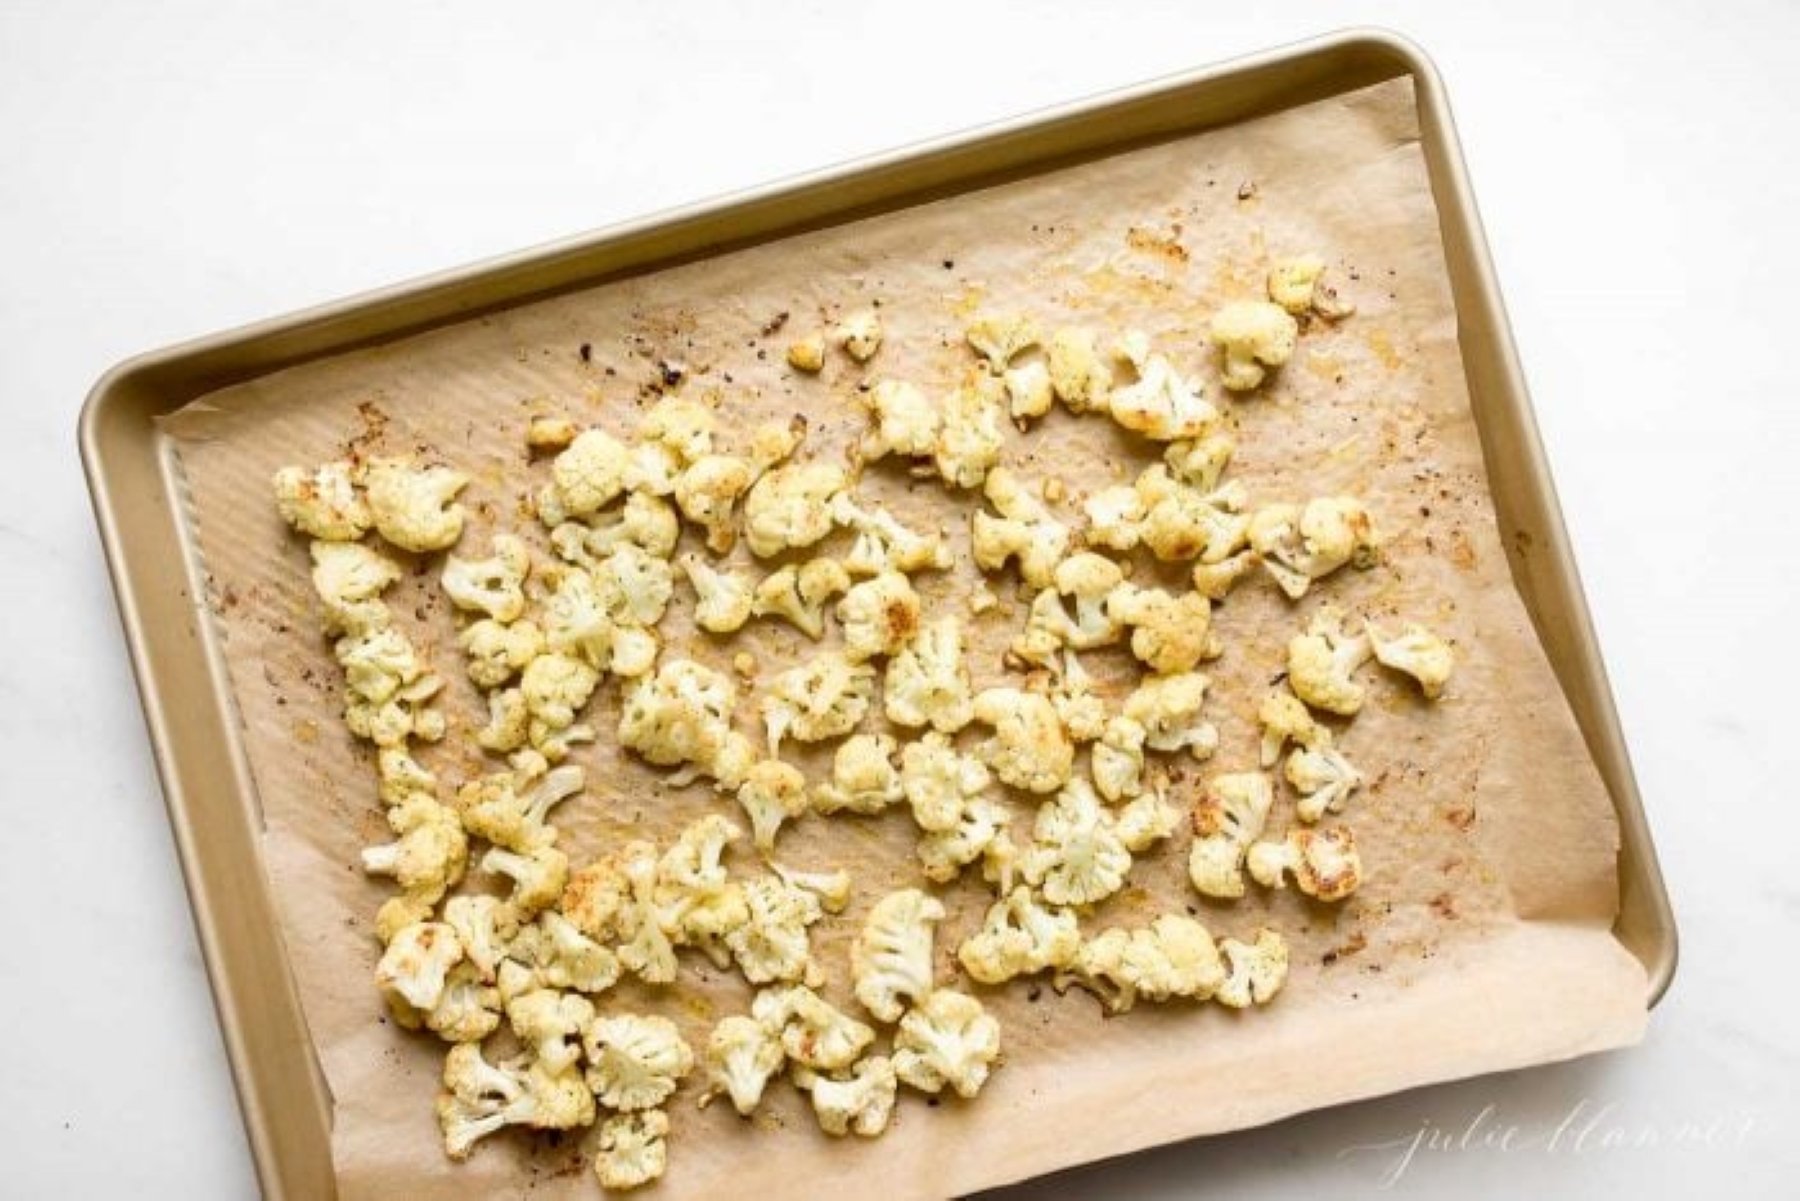 Fiesta ranch cauliflower on a gold baking sheet lined with parchment paper.